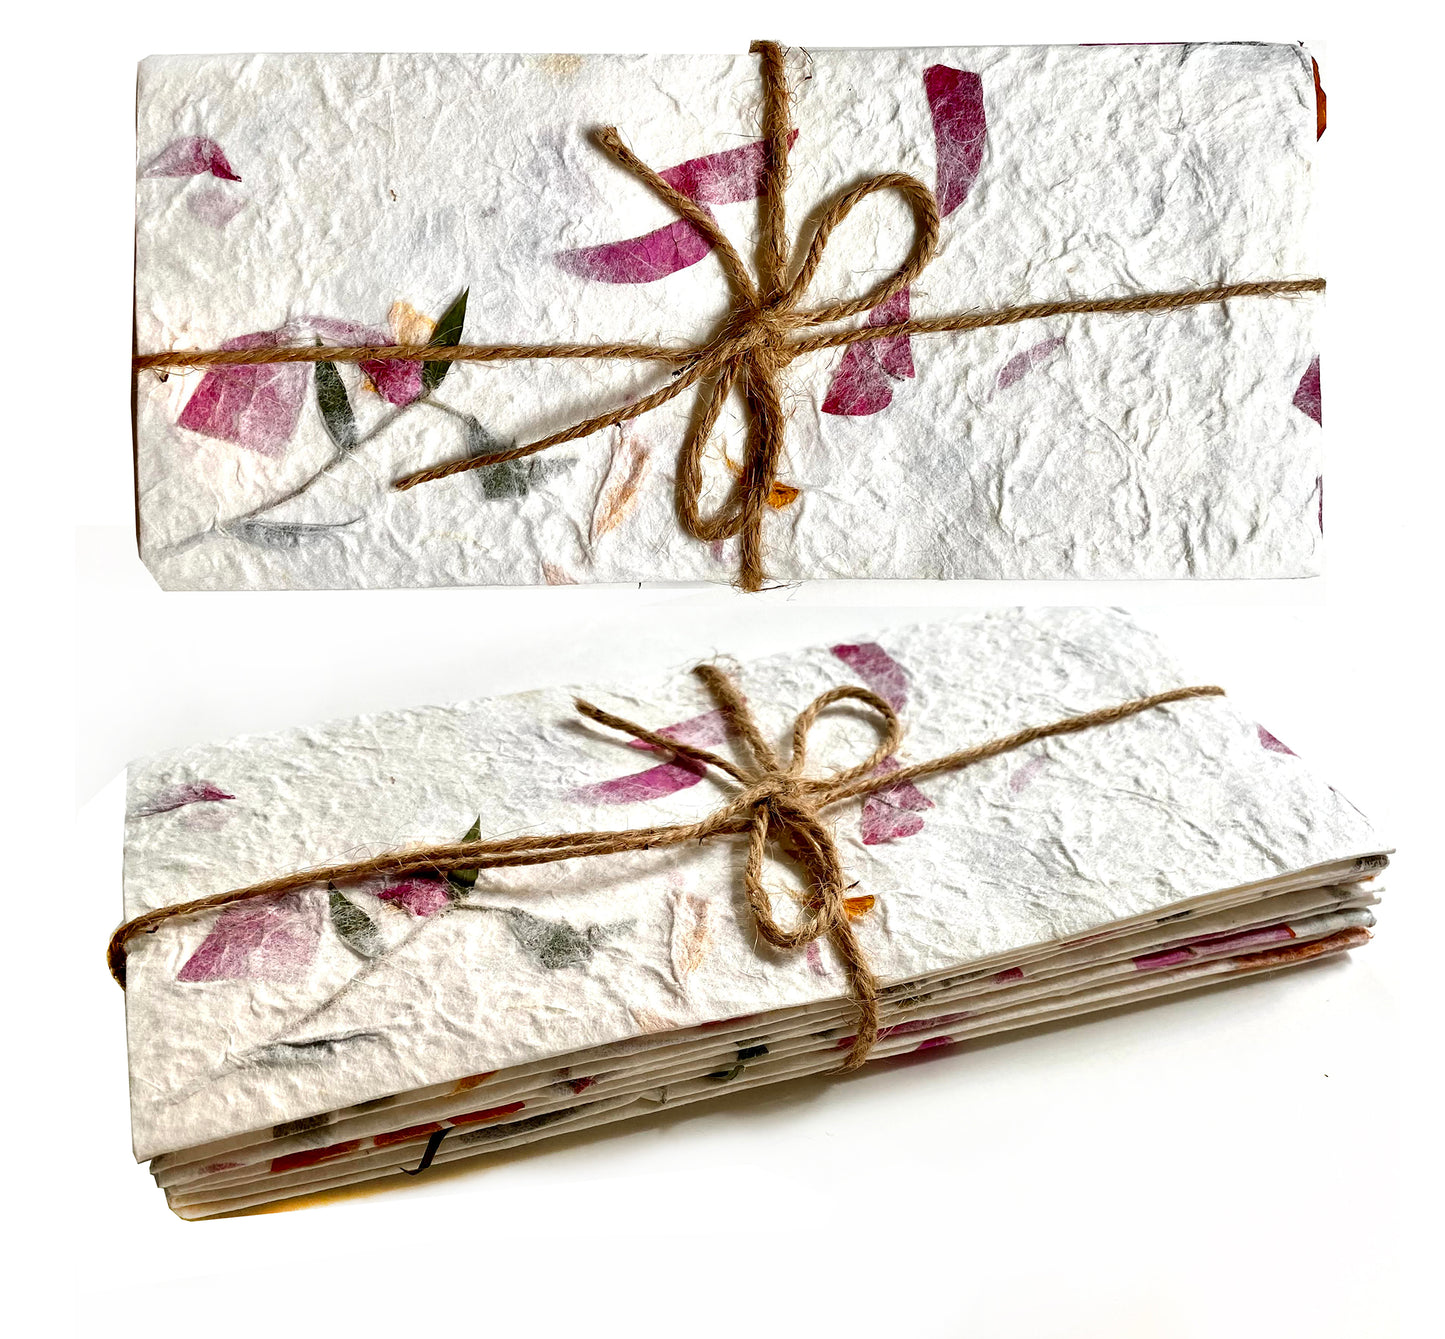 10 Envelope Per Pack Mulberry Paper Pressed Flower Inclusion Paper Handmade Envelope 10 x 21.5 CM - SIZE 3.94 x 8.46 INCH